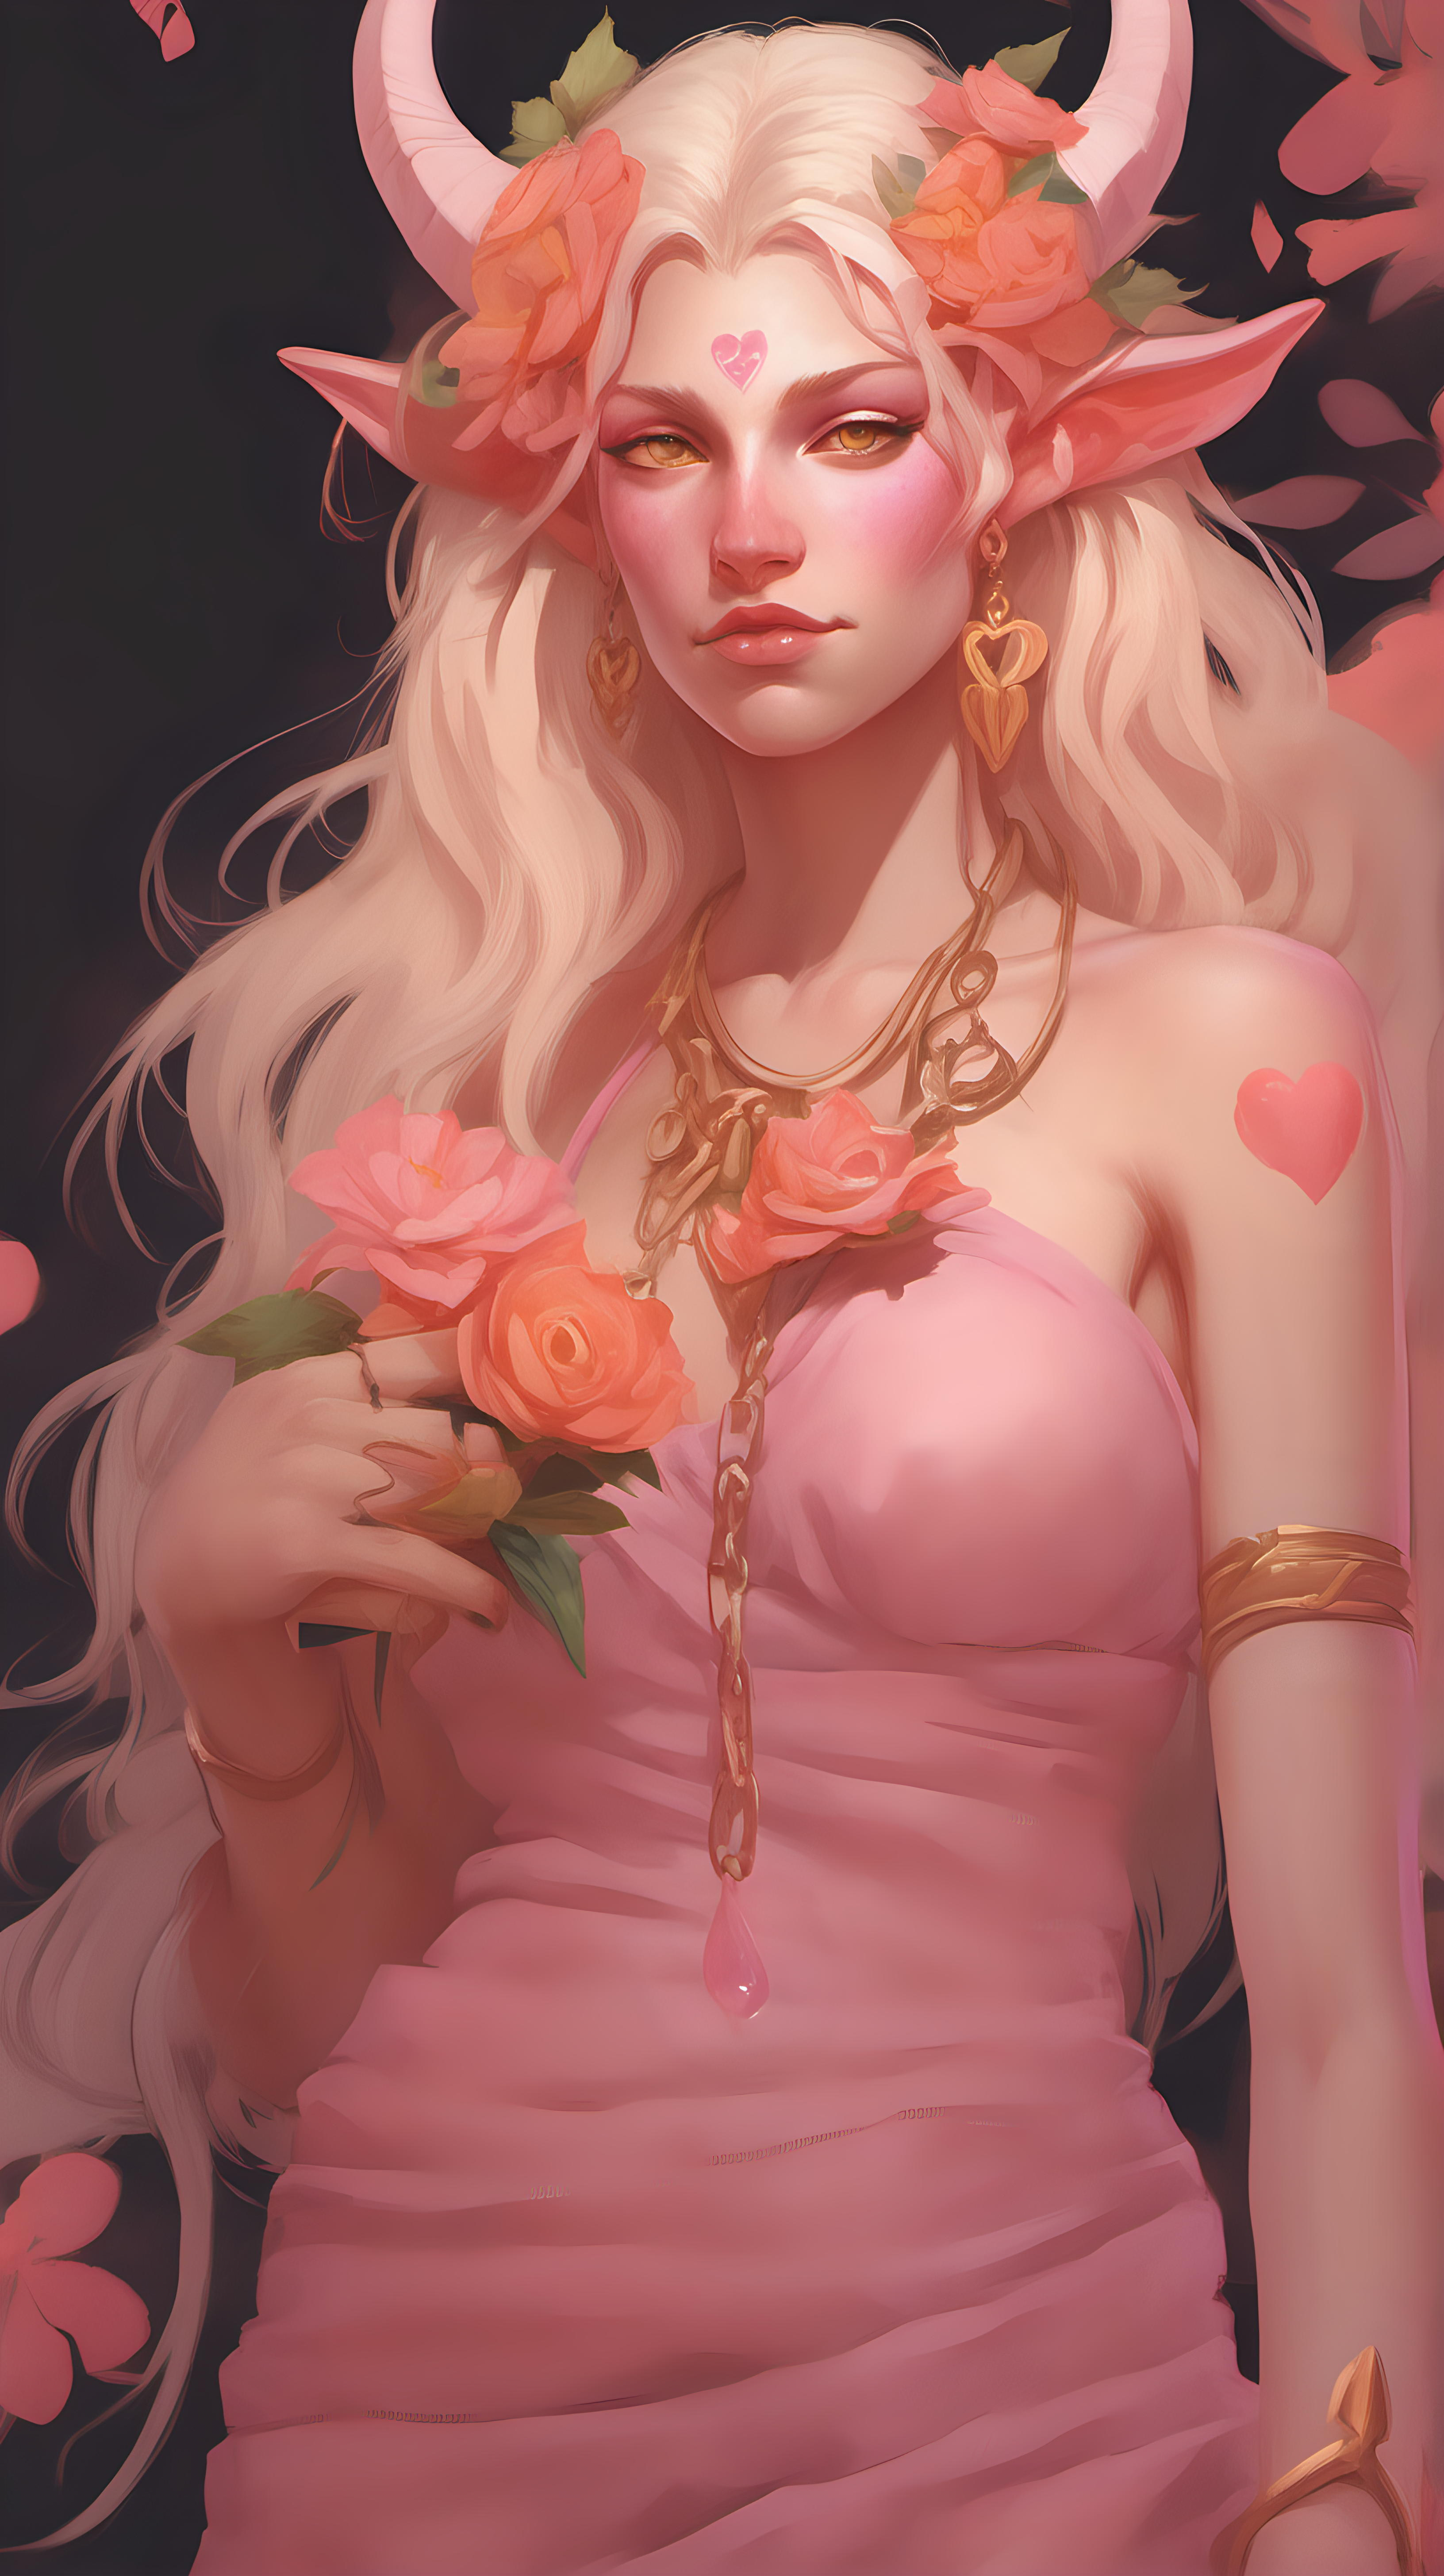 Pink skinned tiefling woman. She has white horns that meet at the top of her head to form a heart. She has light pink eyes. She has light blonde eyelashes. Her eyelashes are not black. She has blonde long hair with a orange tint. She is wearing a pink Greek-style dress with lots of flowers. She is wearing gold jewelry. She is holding a bouquet of pink flowers. 